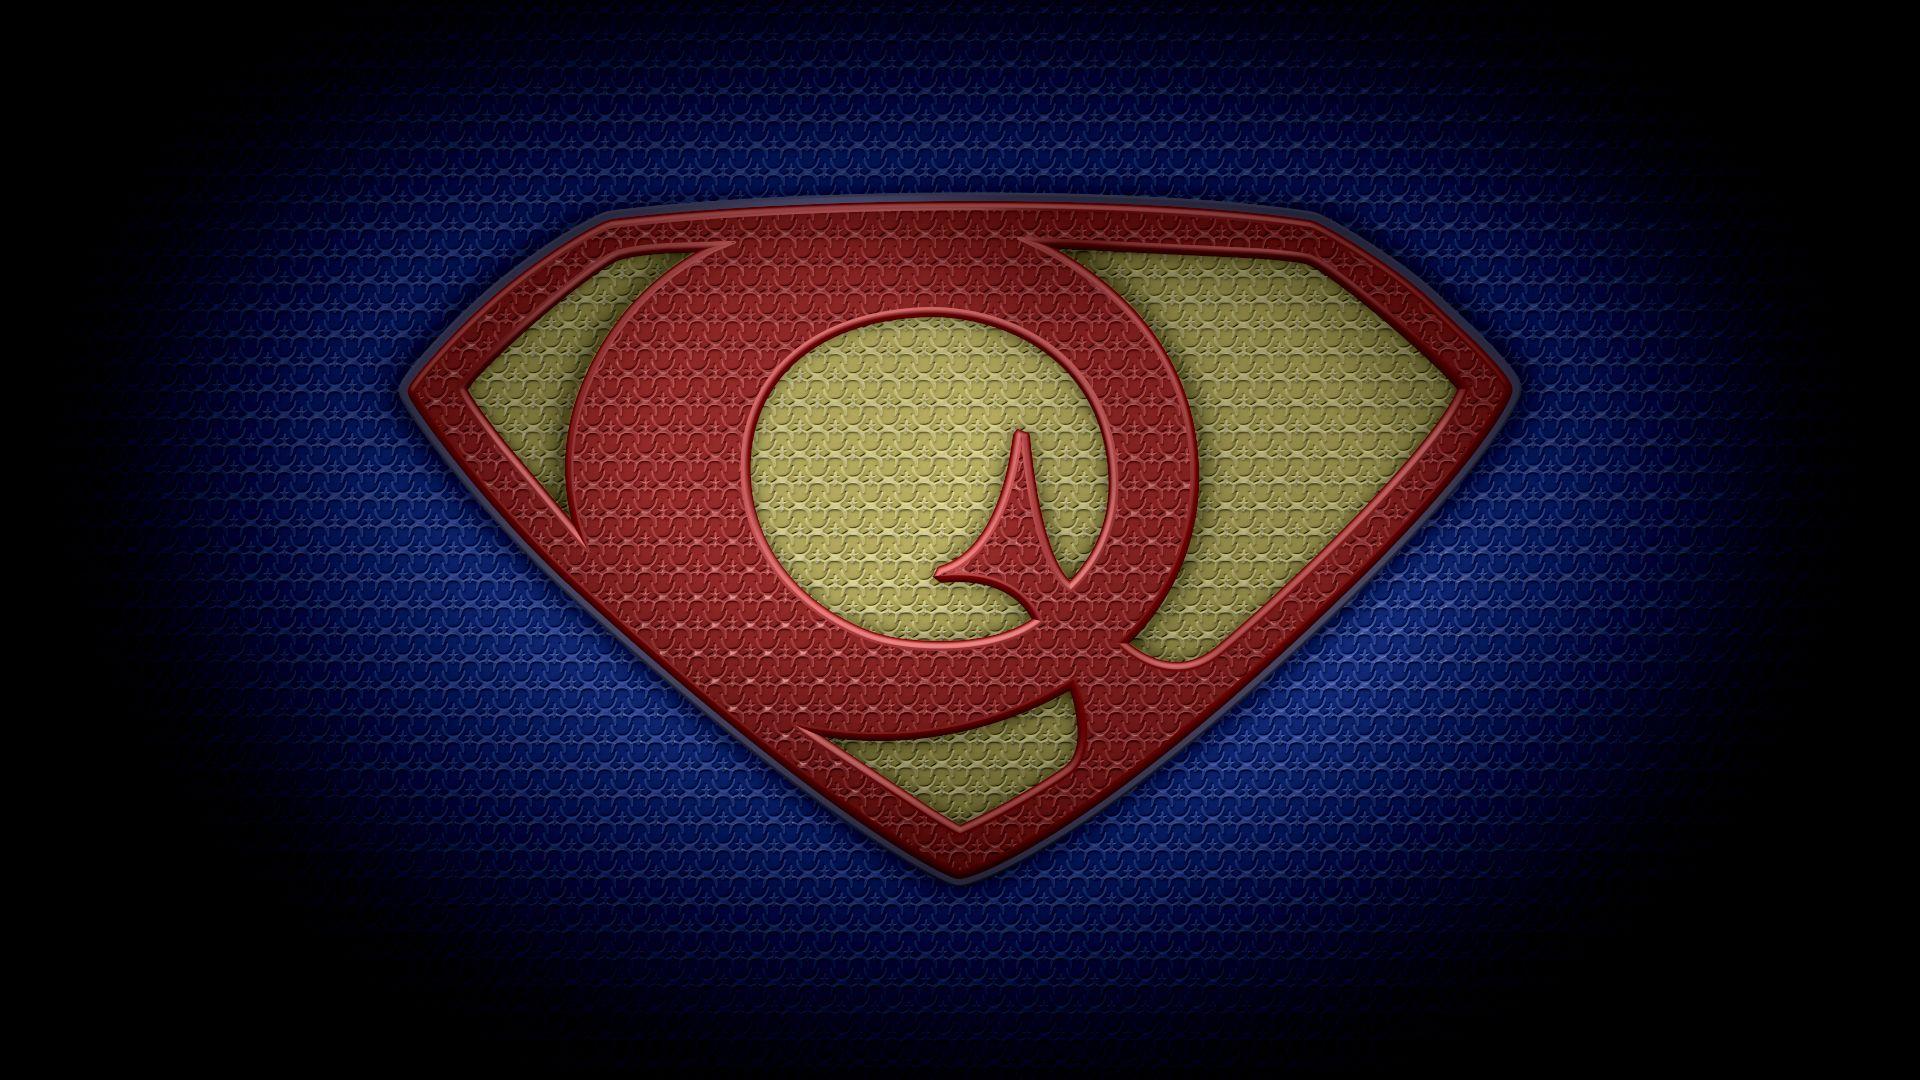 The letter Q in the style of “Man of Steel”